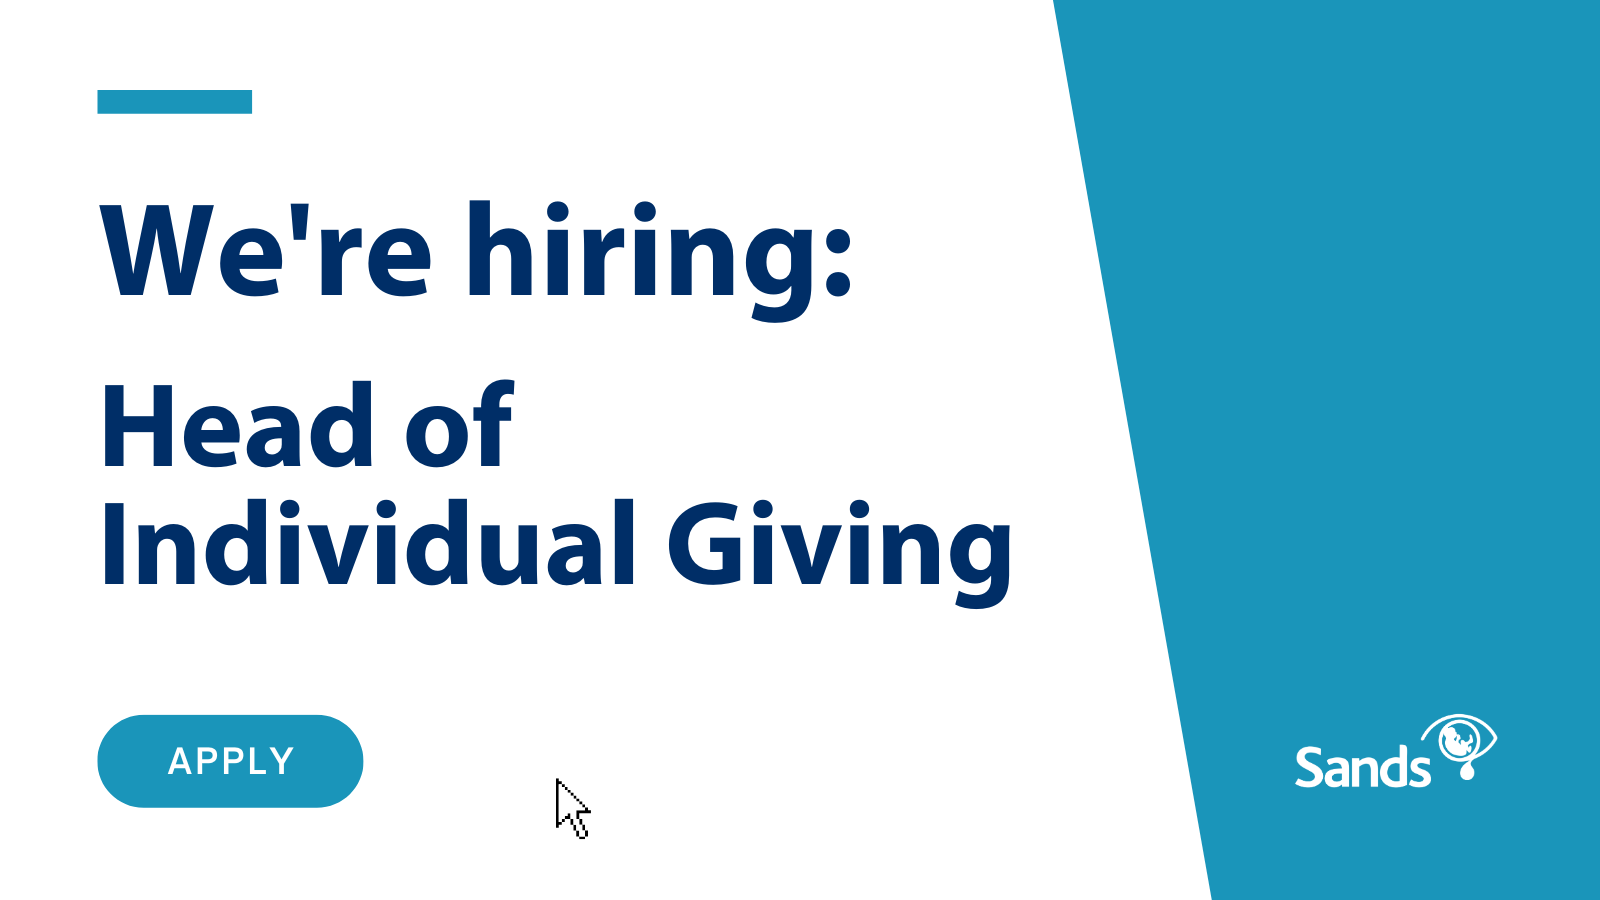 We are hiring Head of Individual Giving